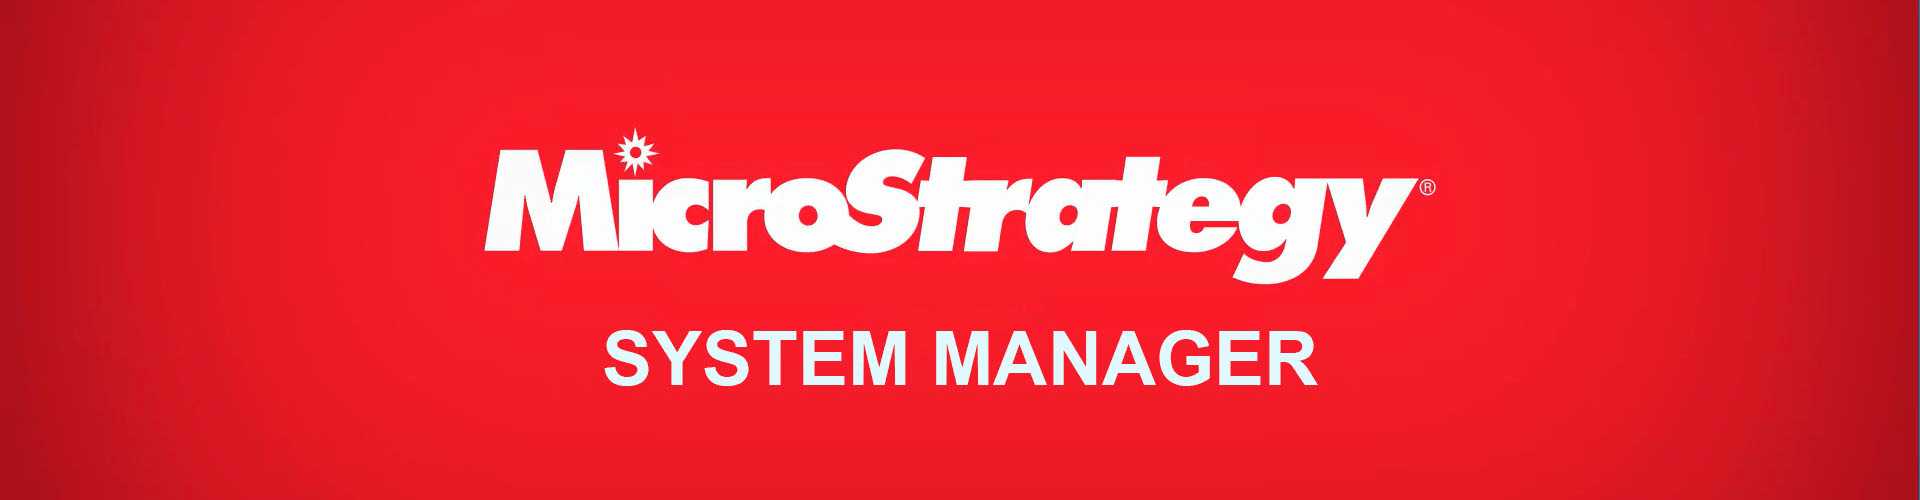 MicroStrategy System Manager